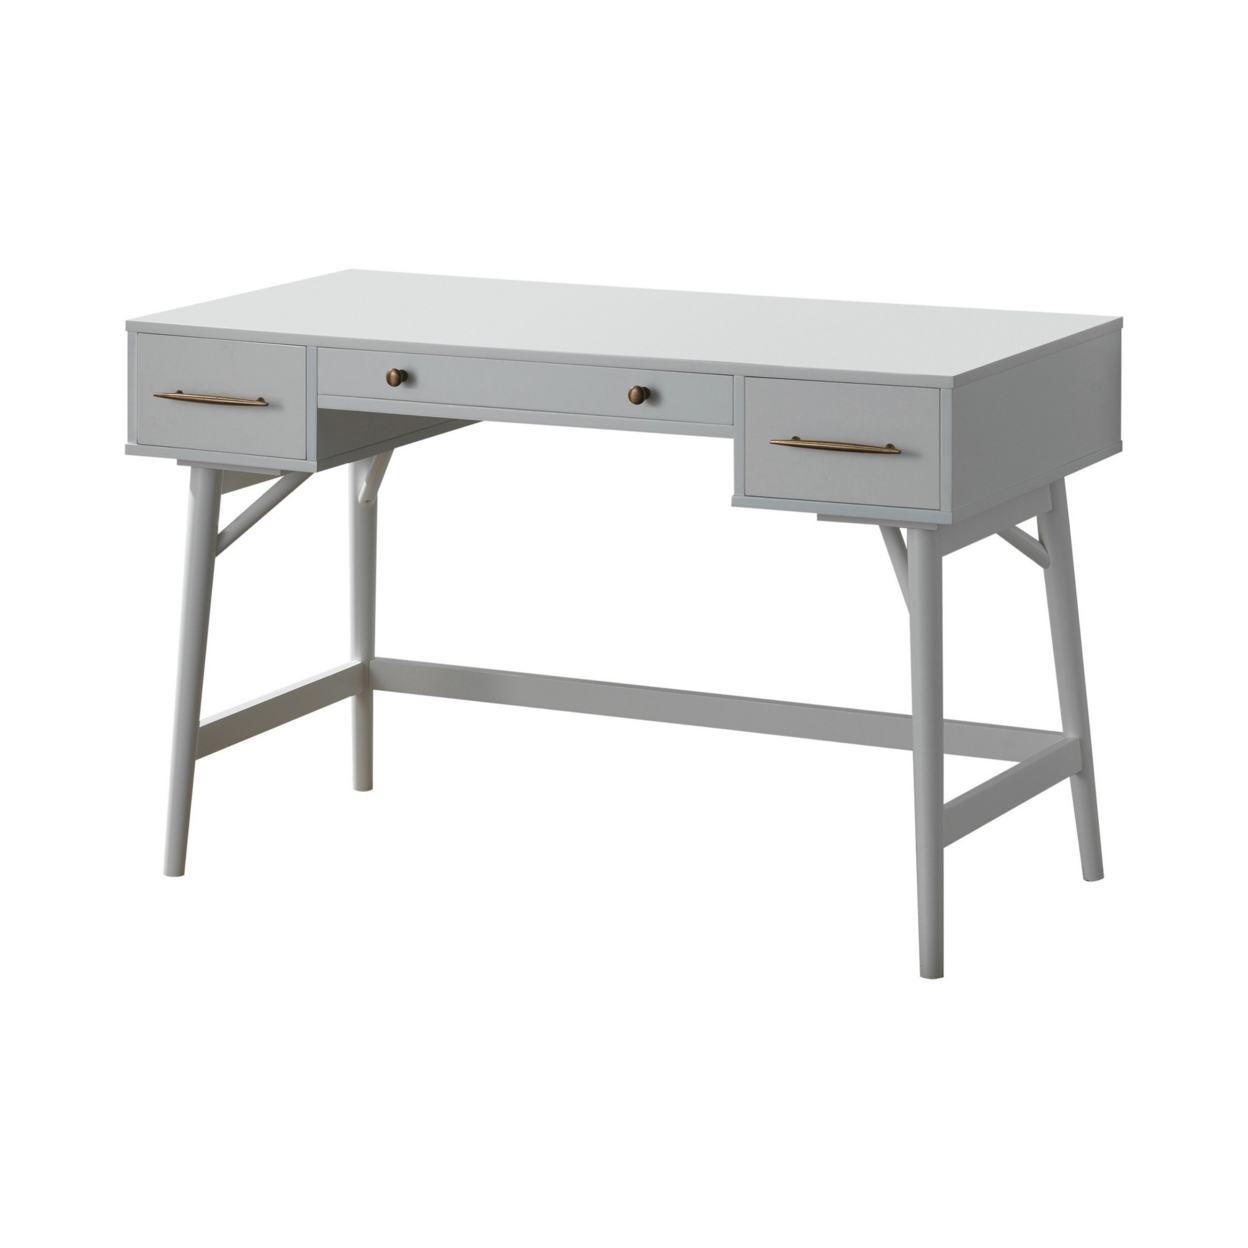 Wooden Writing Desk With 3 Drawers And Tapered Legs, White- Saltoro Sherpi